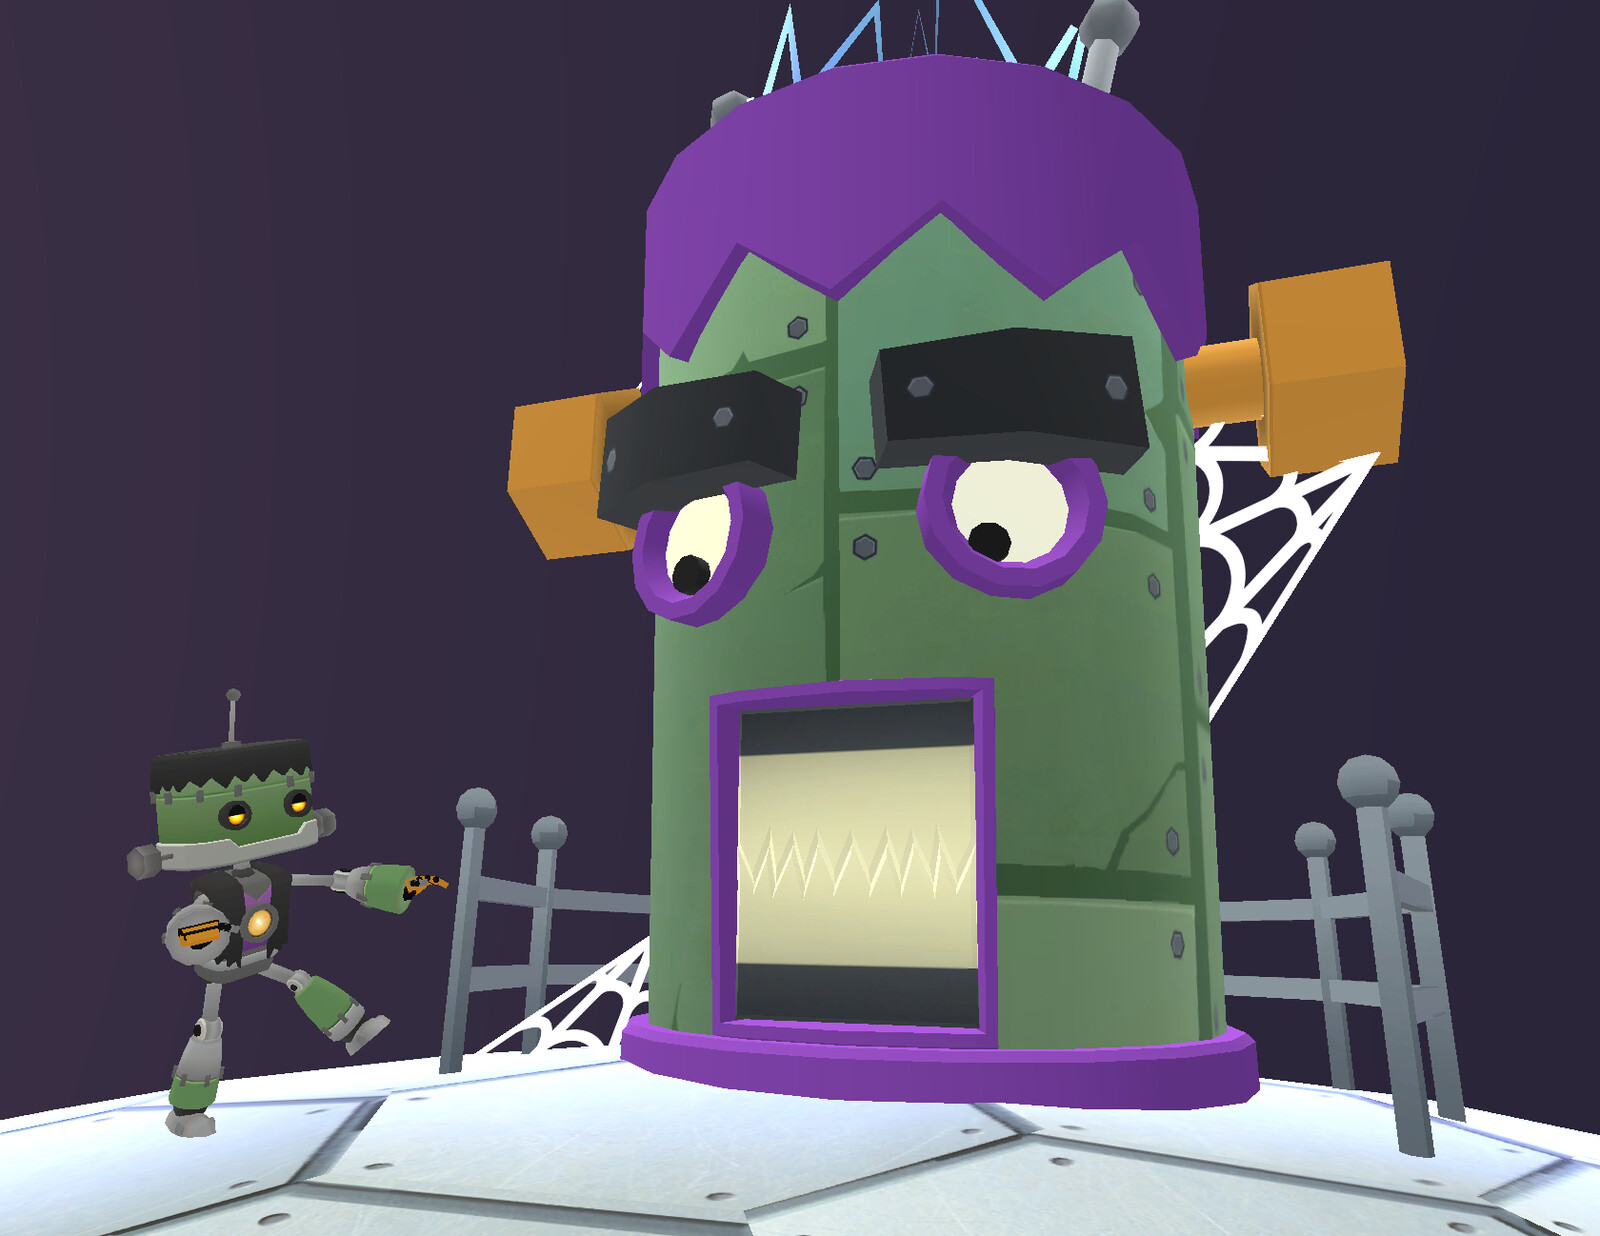 Frankenbot approaching the Cosmically Haunted House!